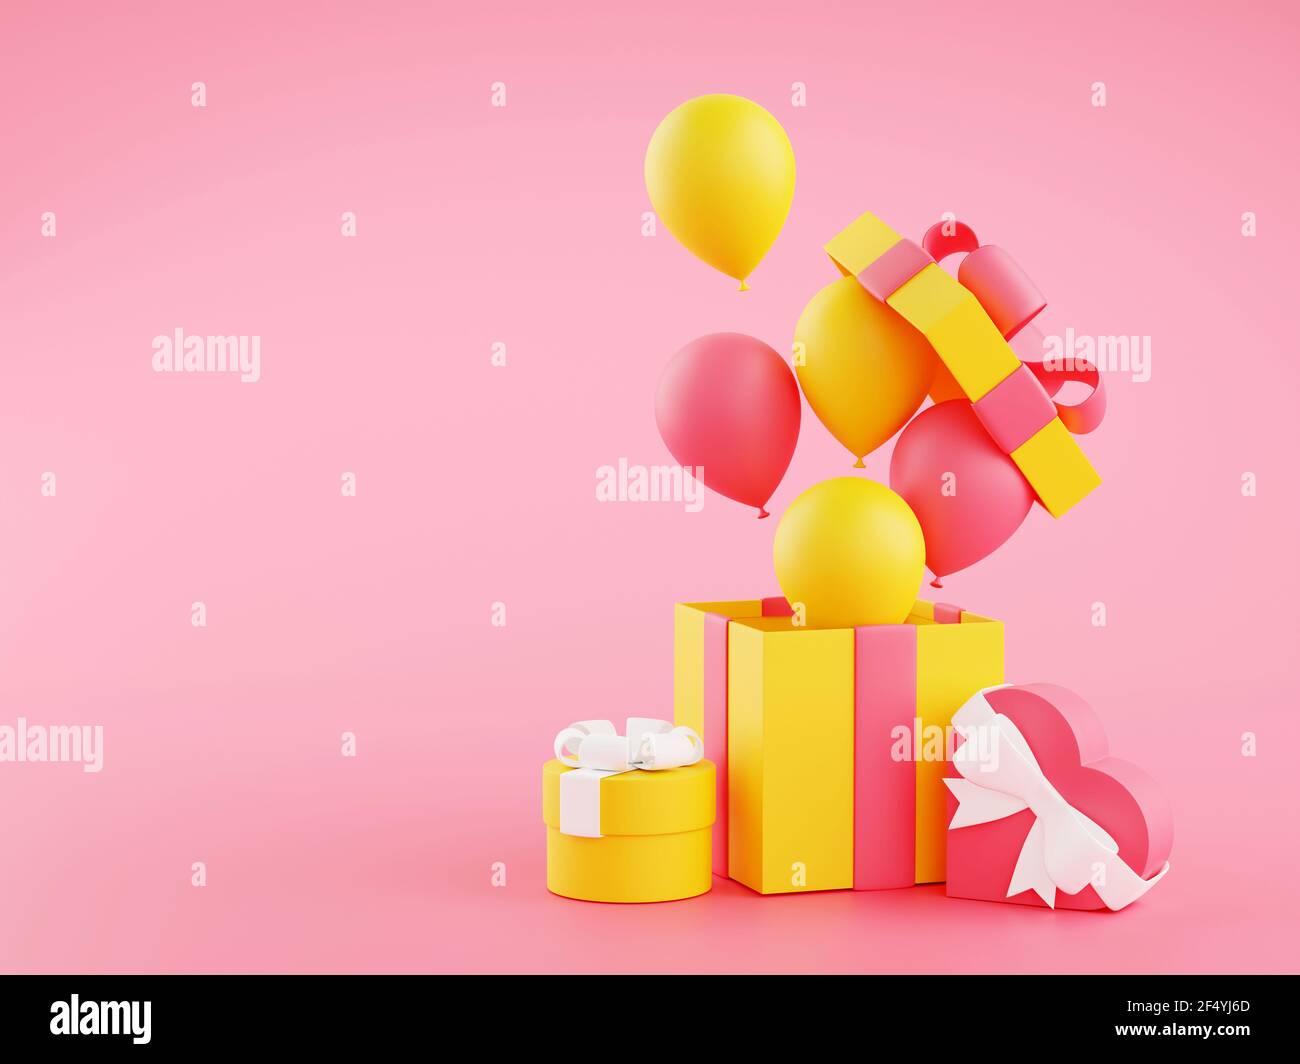 Gift boxes and balloons - 3d illustration of open birthday present packages with ribbons and flying balloons. Stock Photo